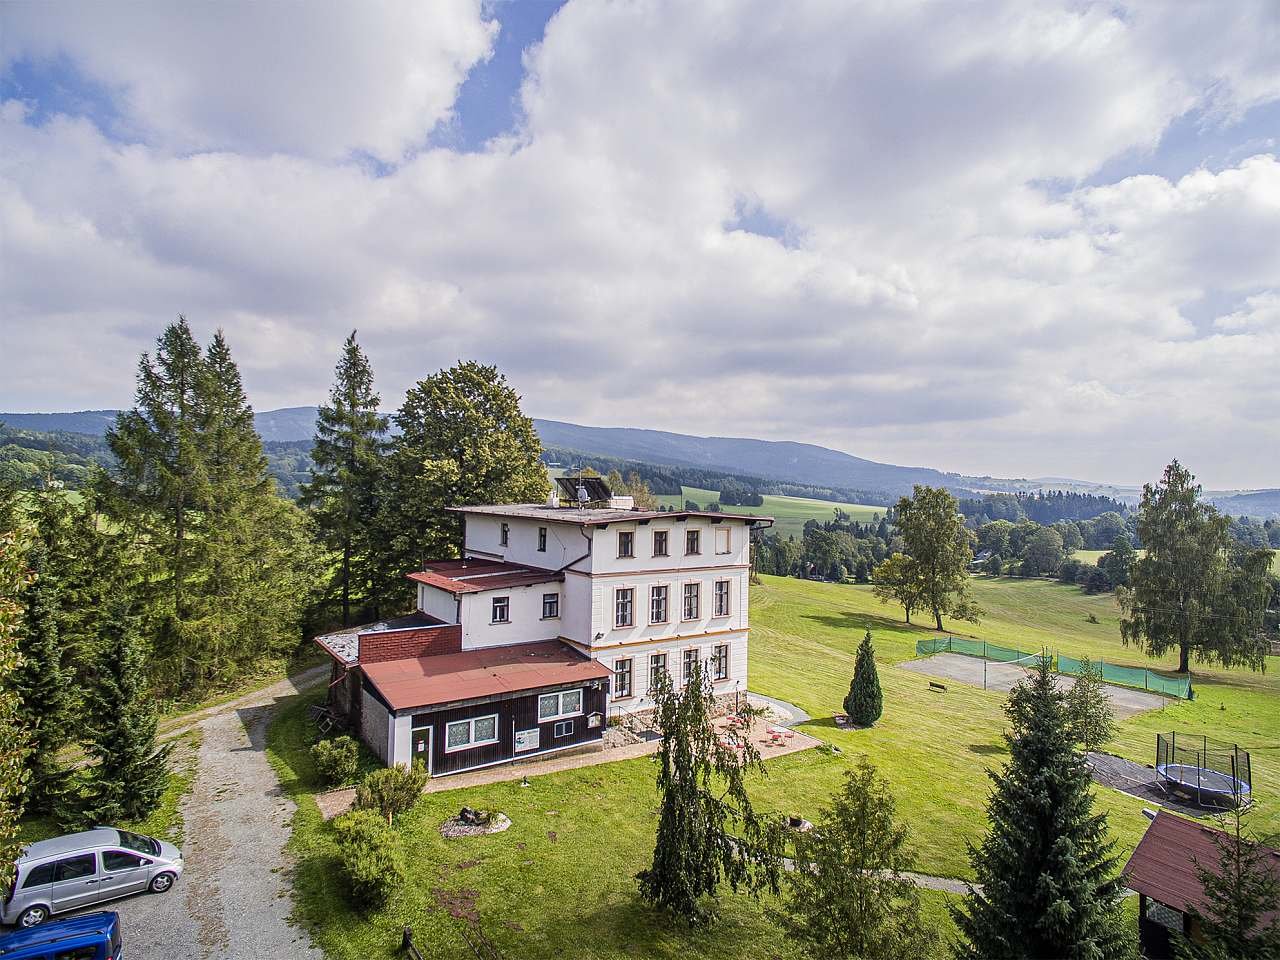 The guesthouse is semi-secluded. Drone photo.